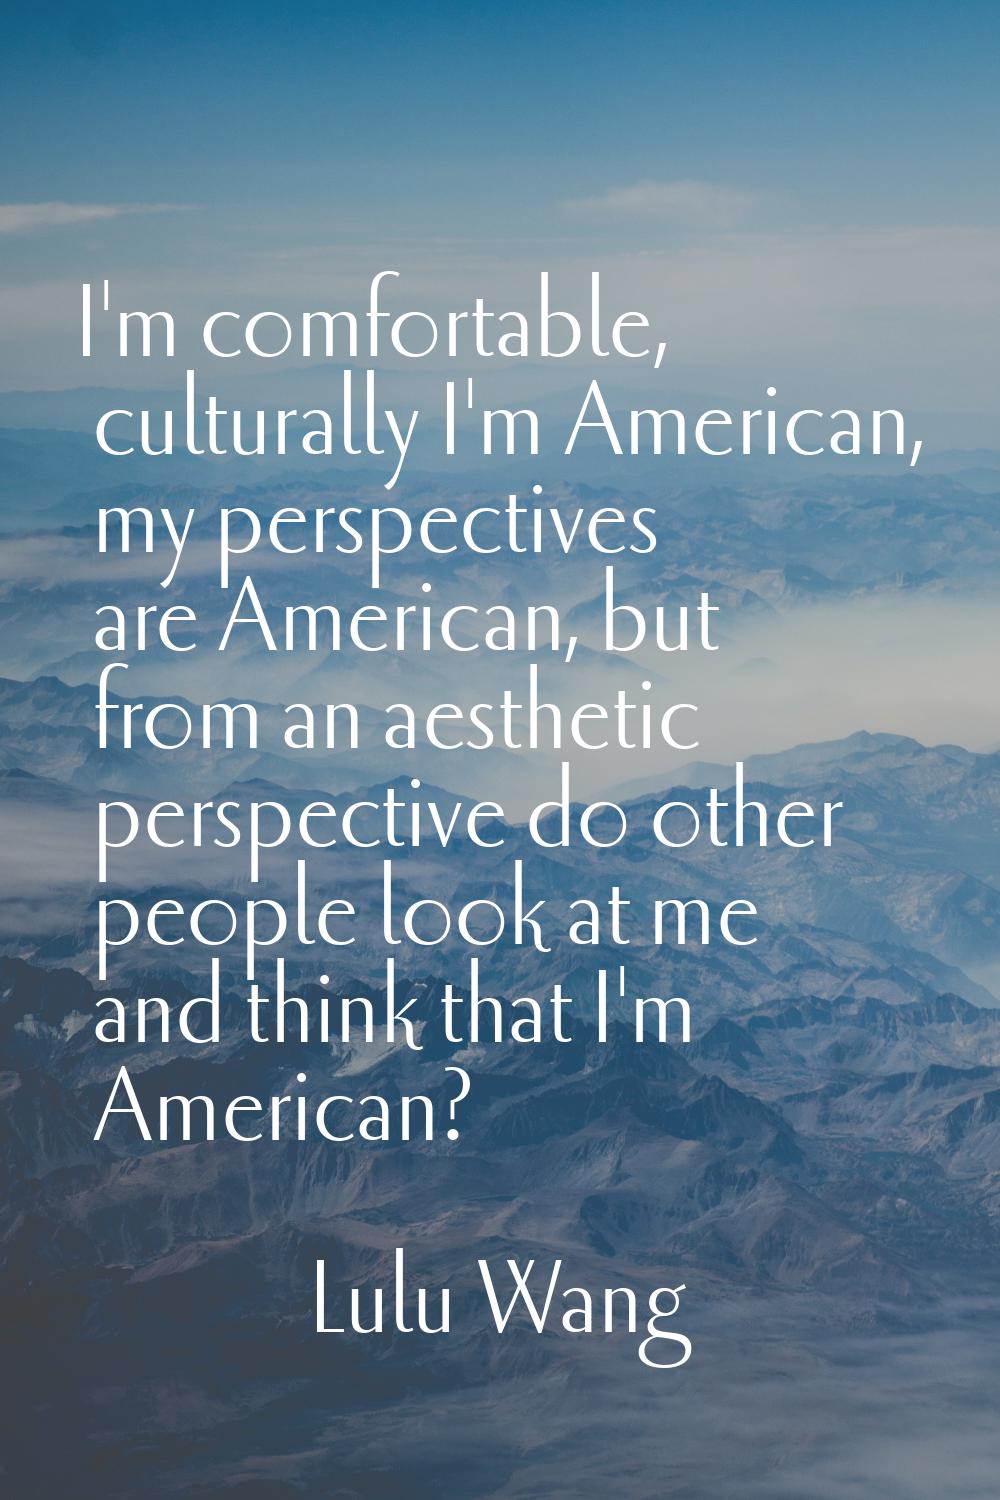 I'm comfortable, culturally I'm American, my perspectives are American, but from an aesthetic persp